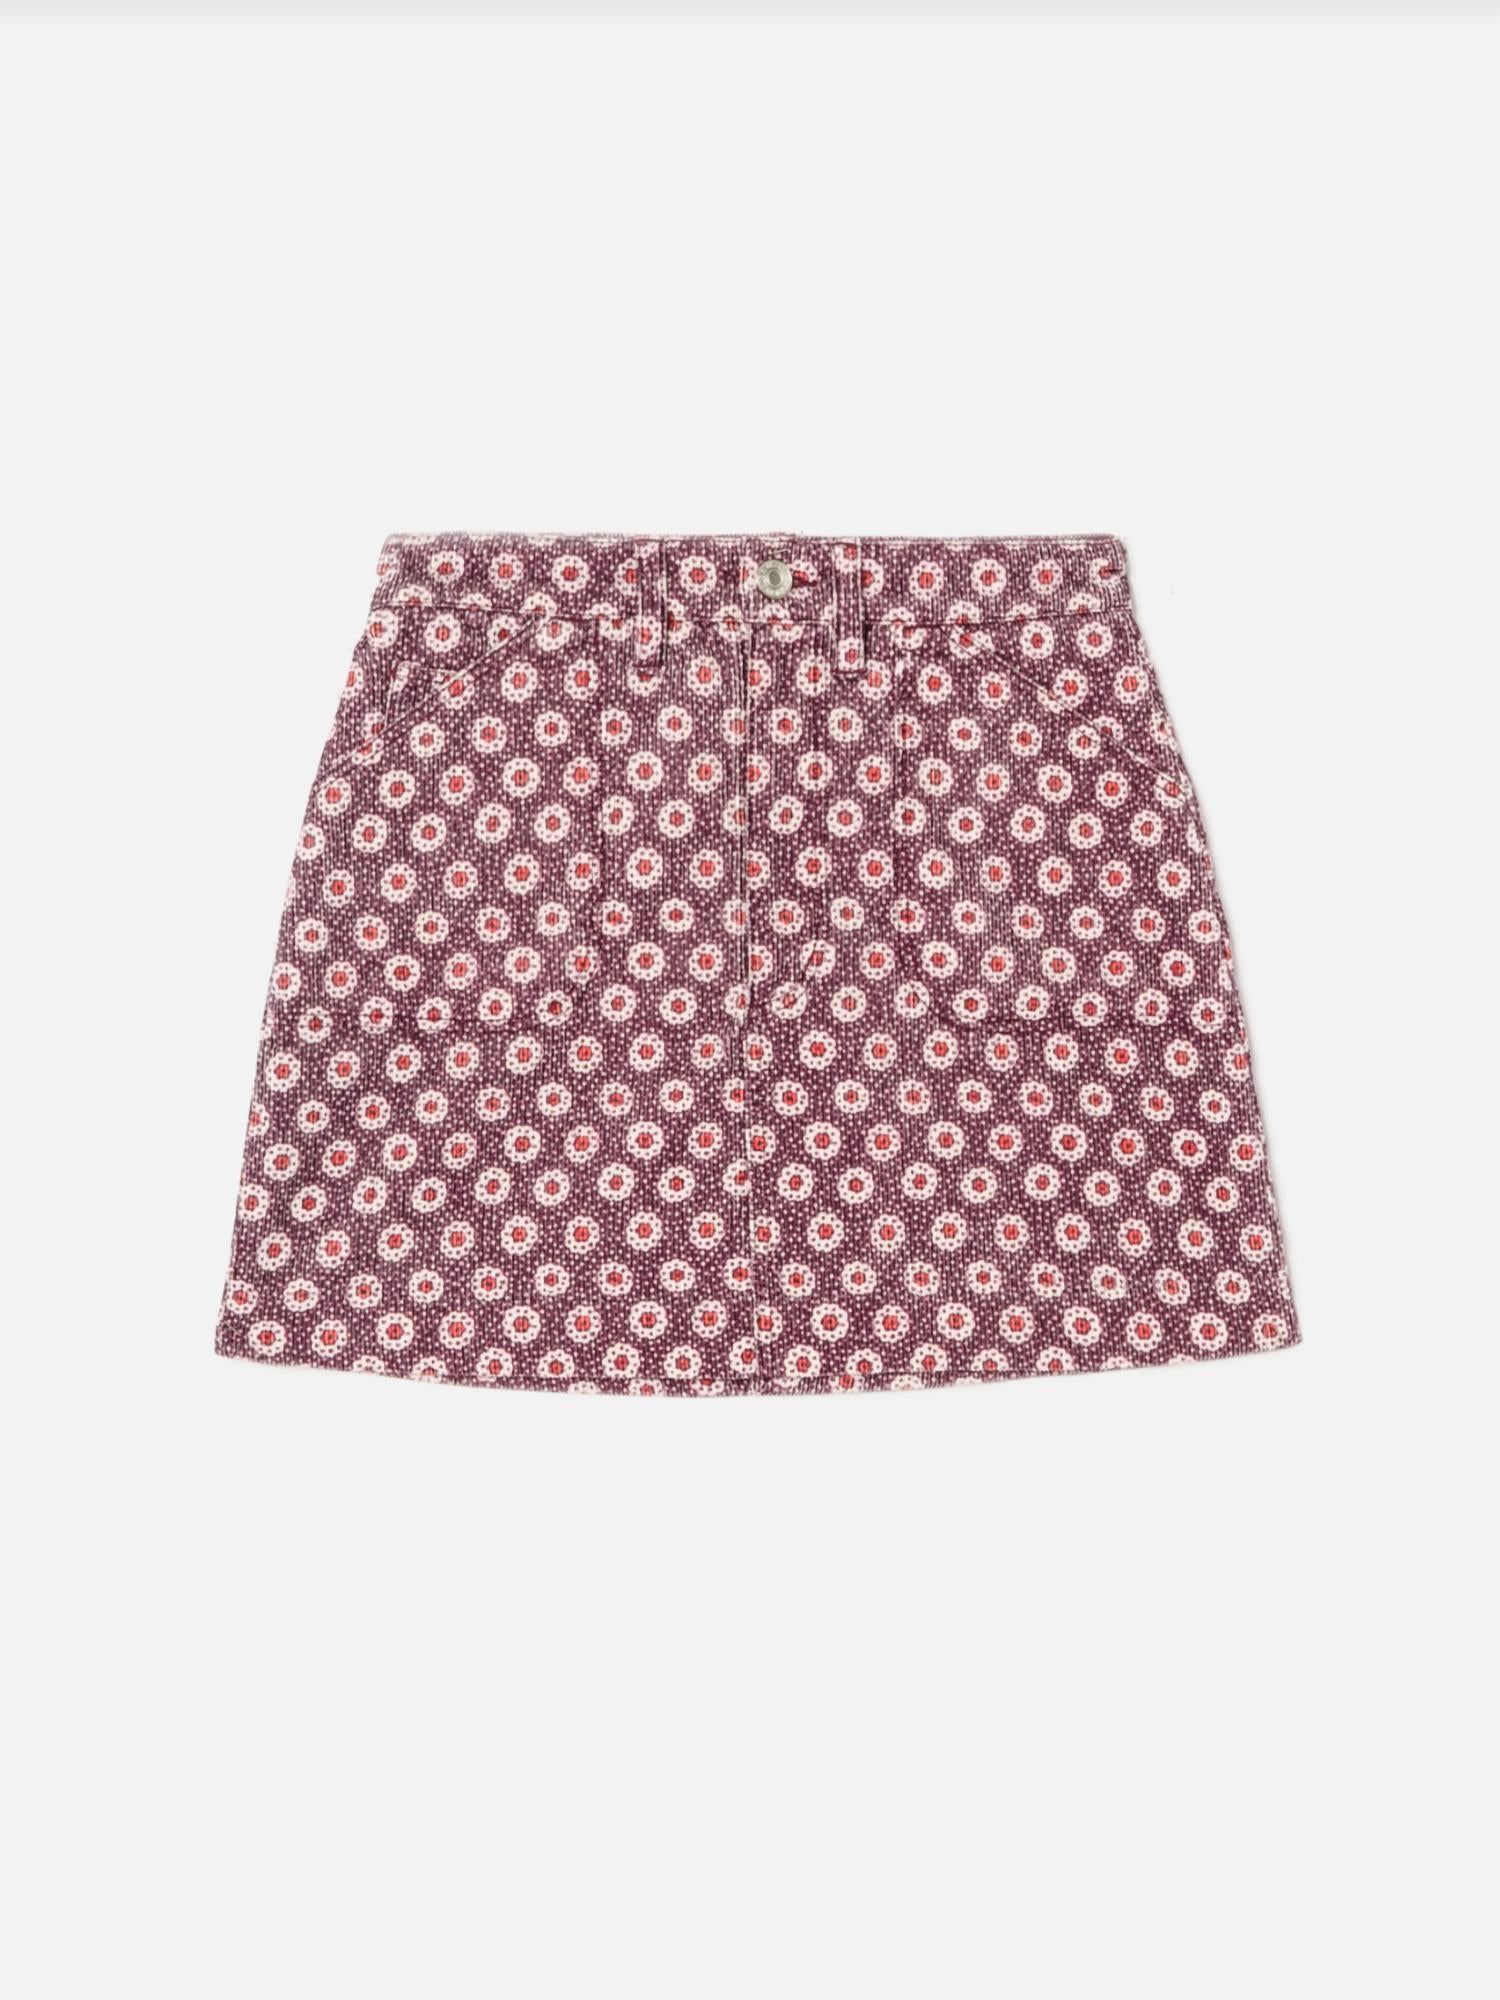 RE/DONE 70S Pocket Mini Skirt in Plum Stamp